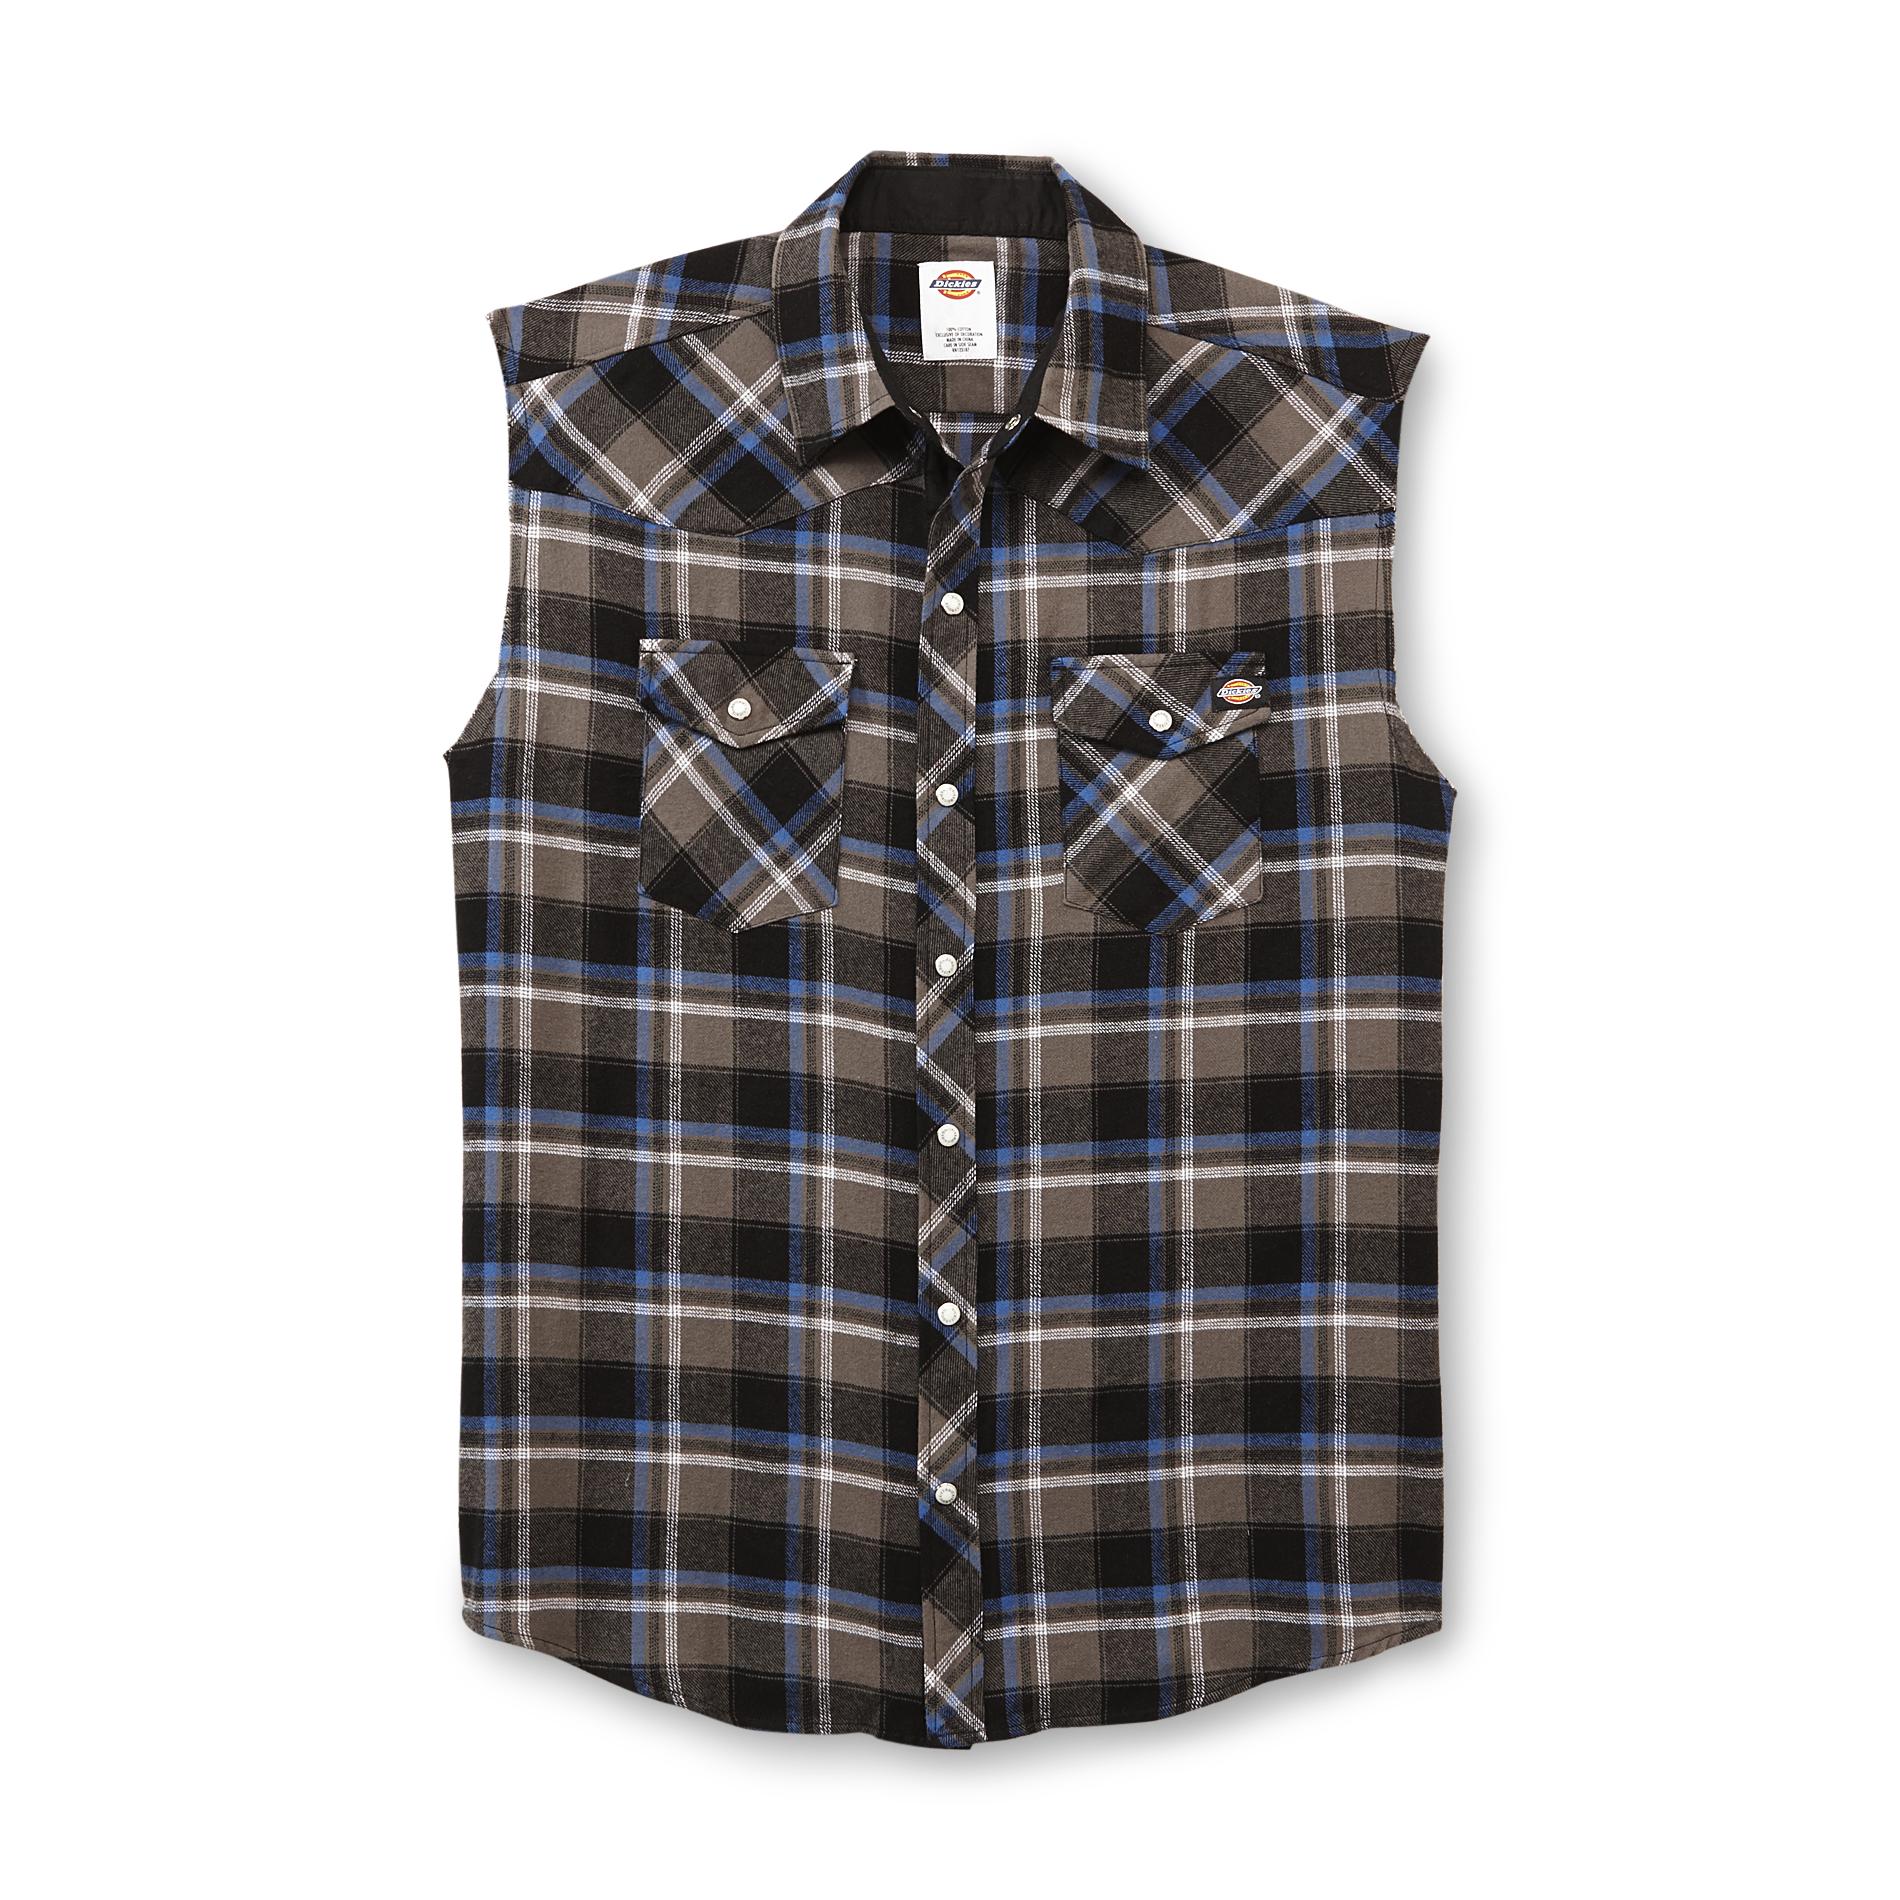 Dickies Young Men's Sleeveless Flannel Shirt - Plaid